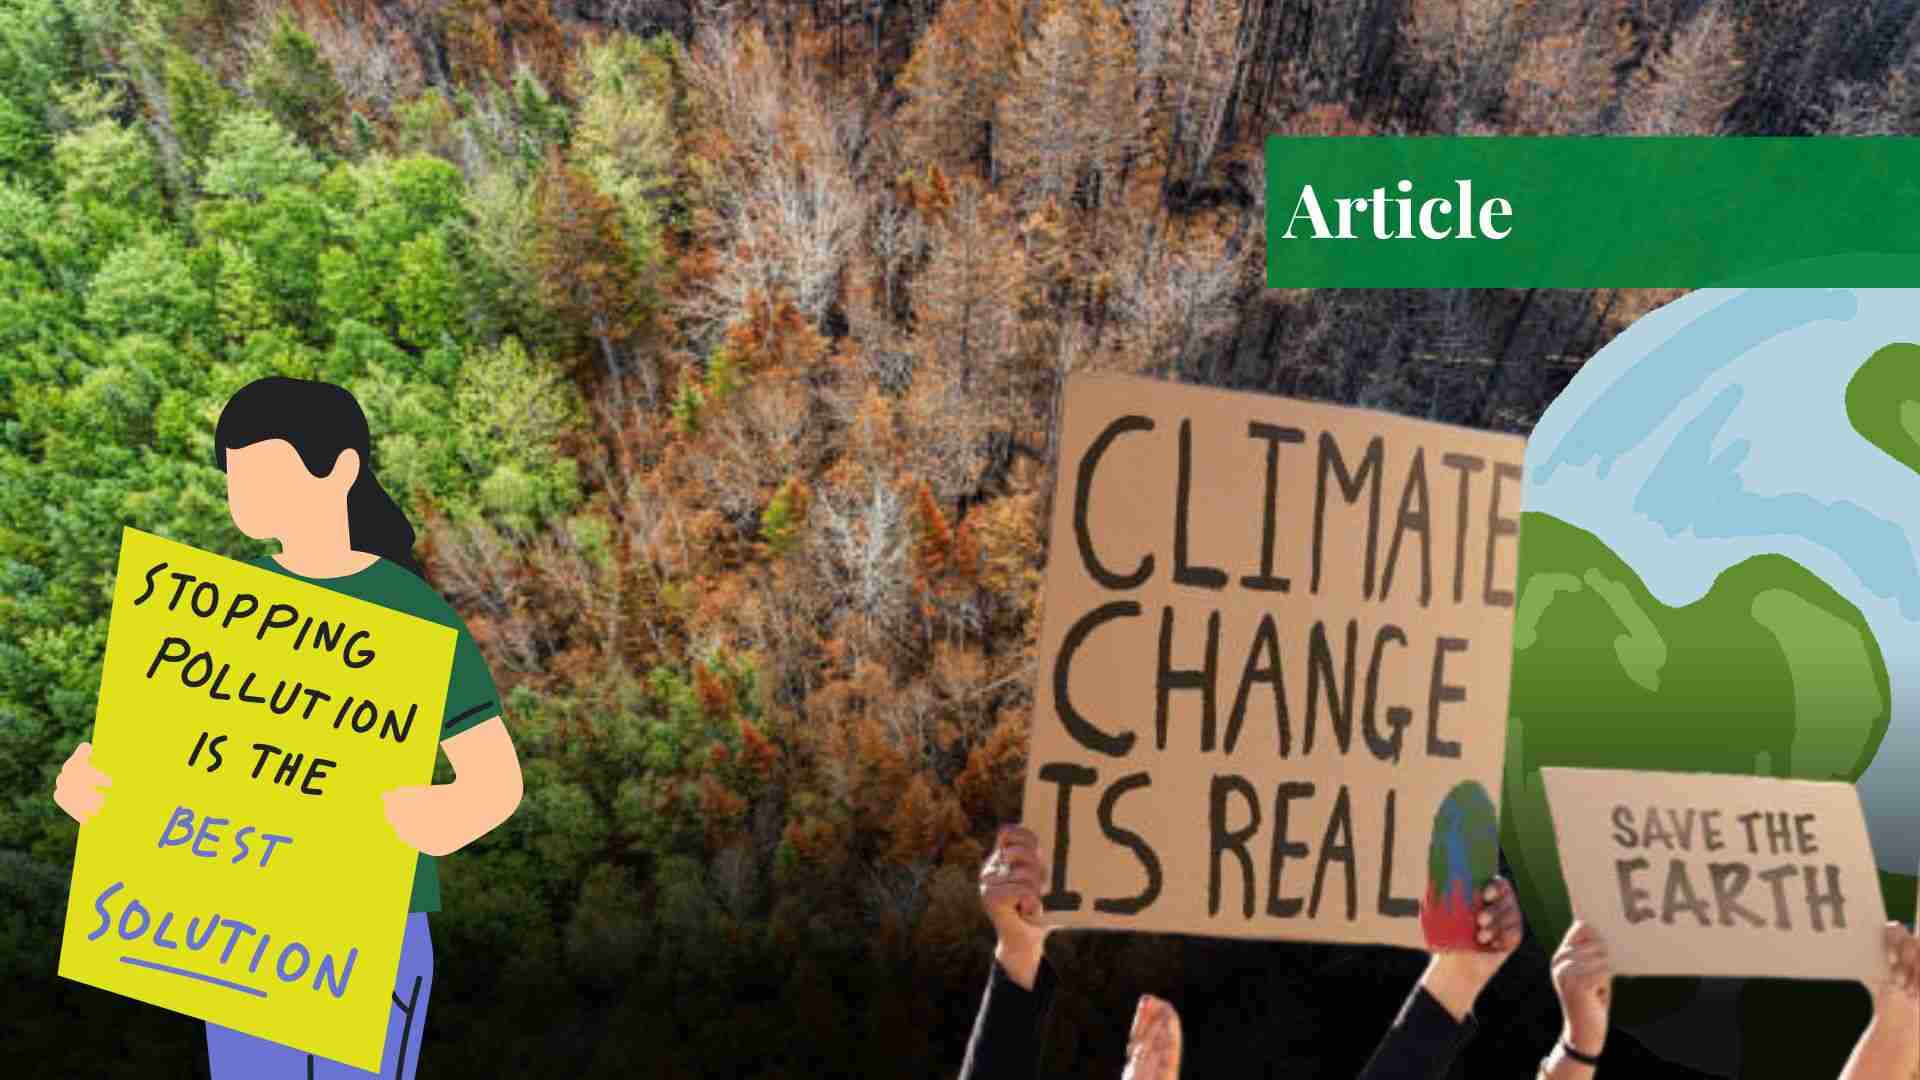 International-agreements-on-climate-change